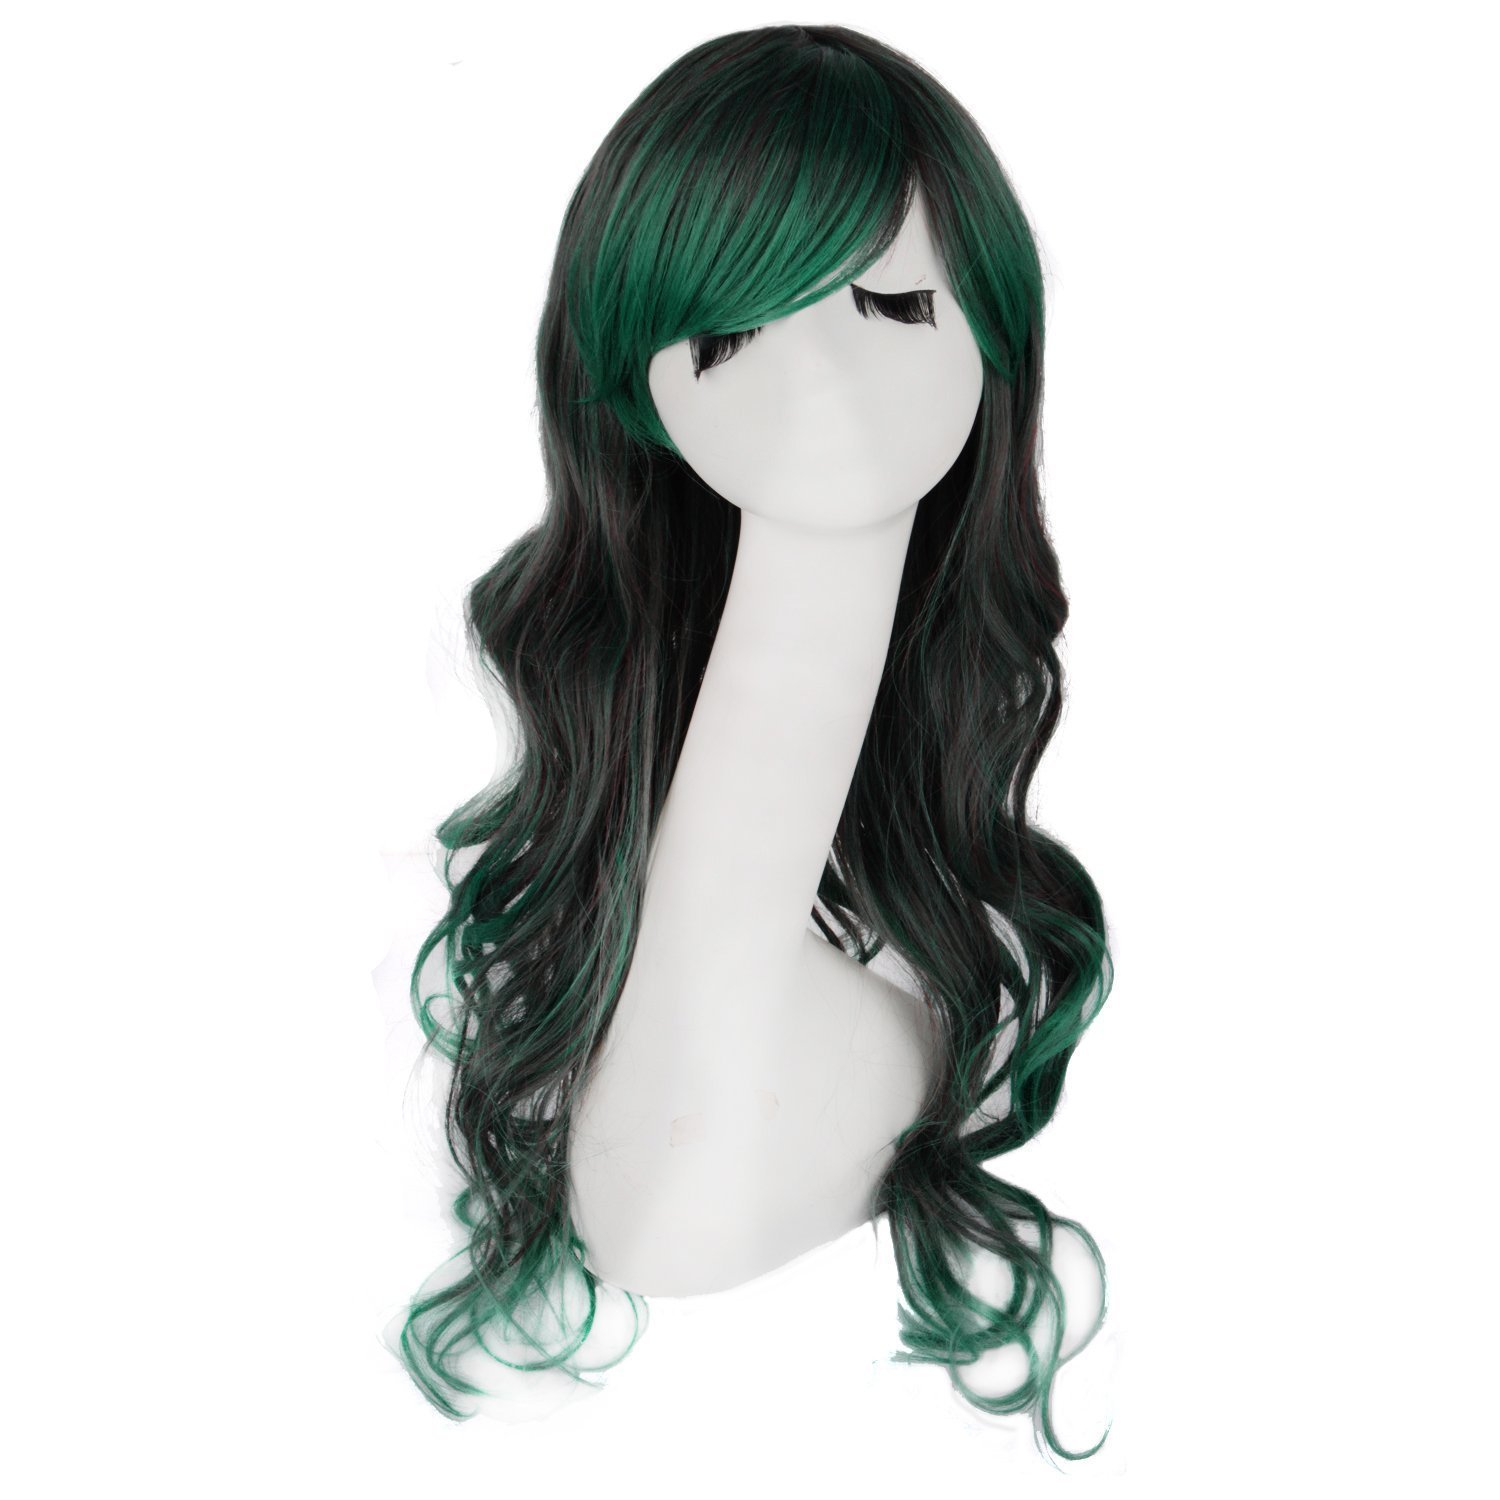 Price:$9.99    MapofBeauty 28" Wavy Multi-Color Lolita Cosplay Party Wig (Brown/Dark Green)  Beauty